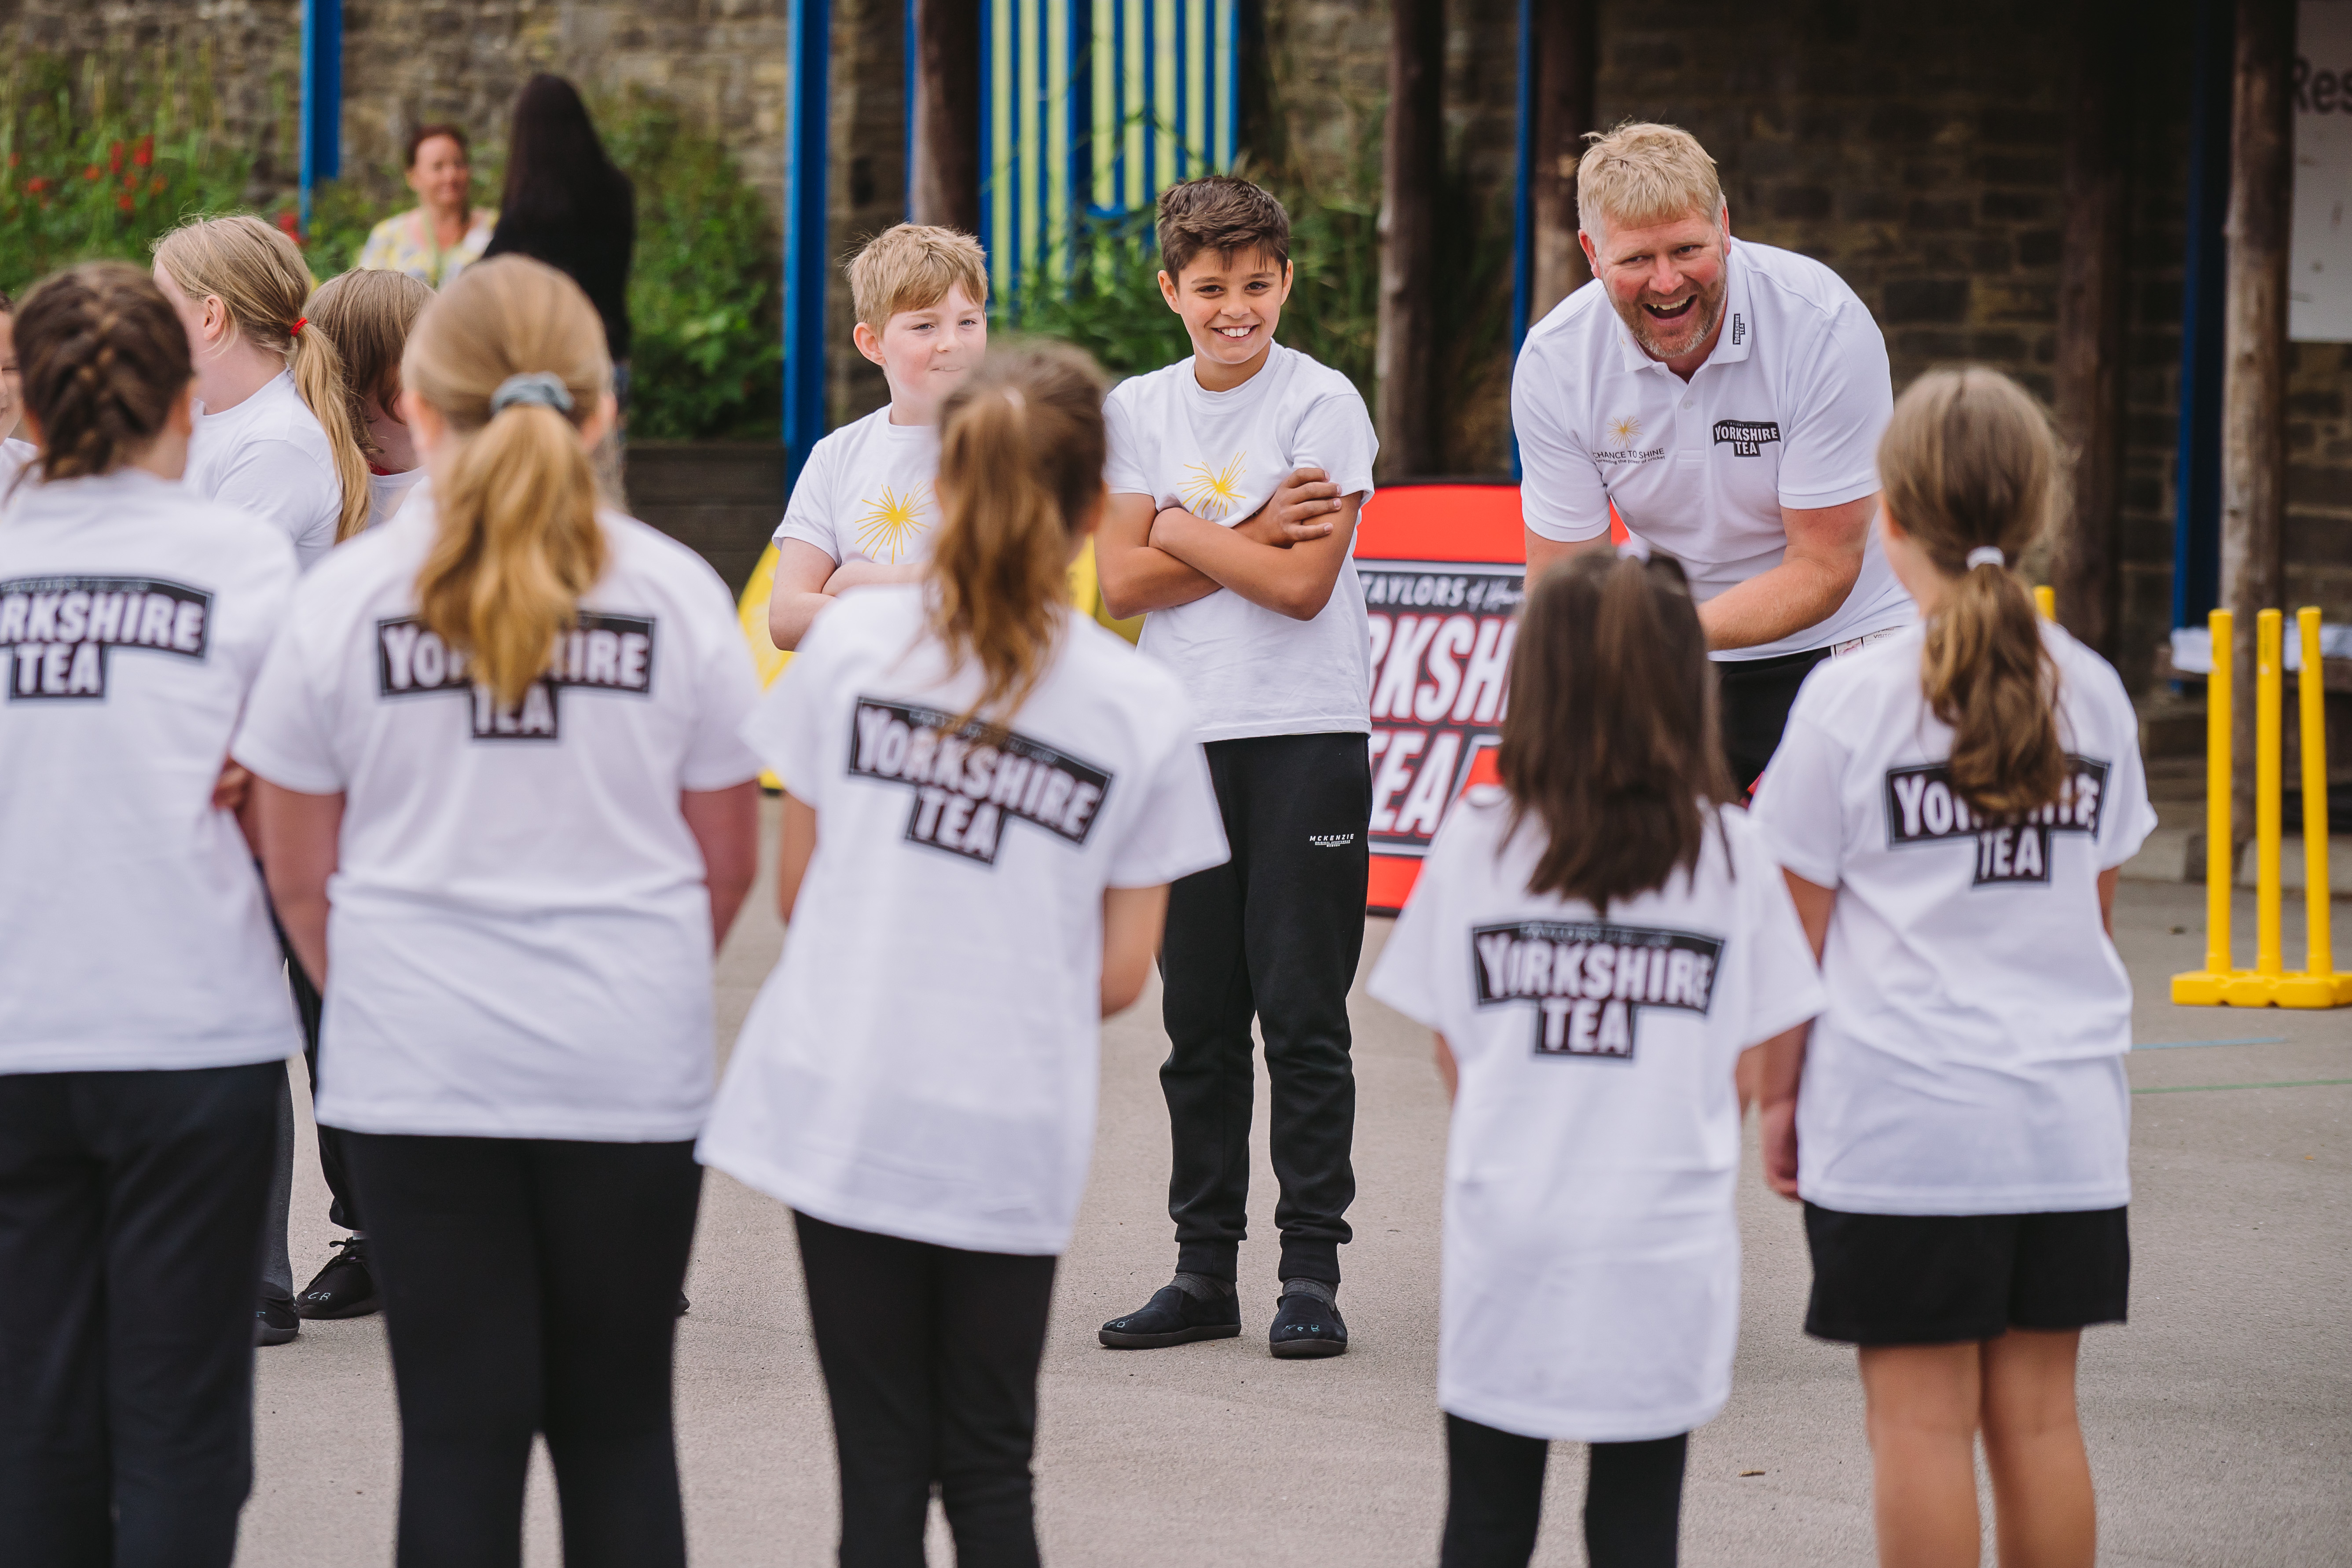 Matthew Hoggard helped out at the launch of National Cricket Week.